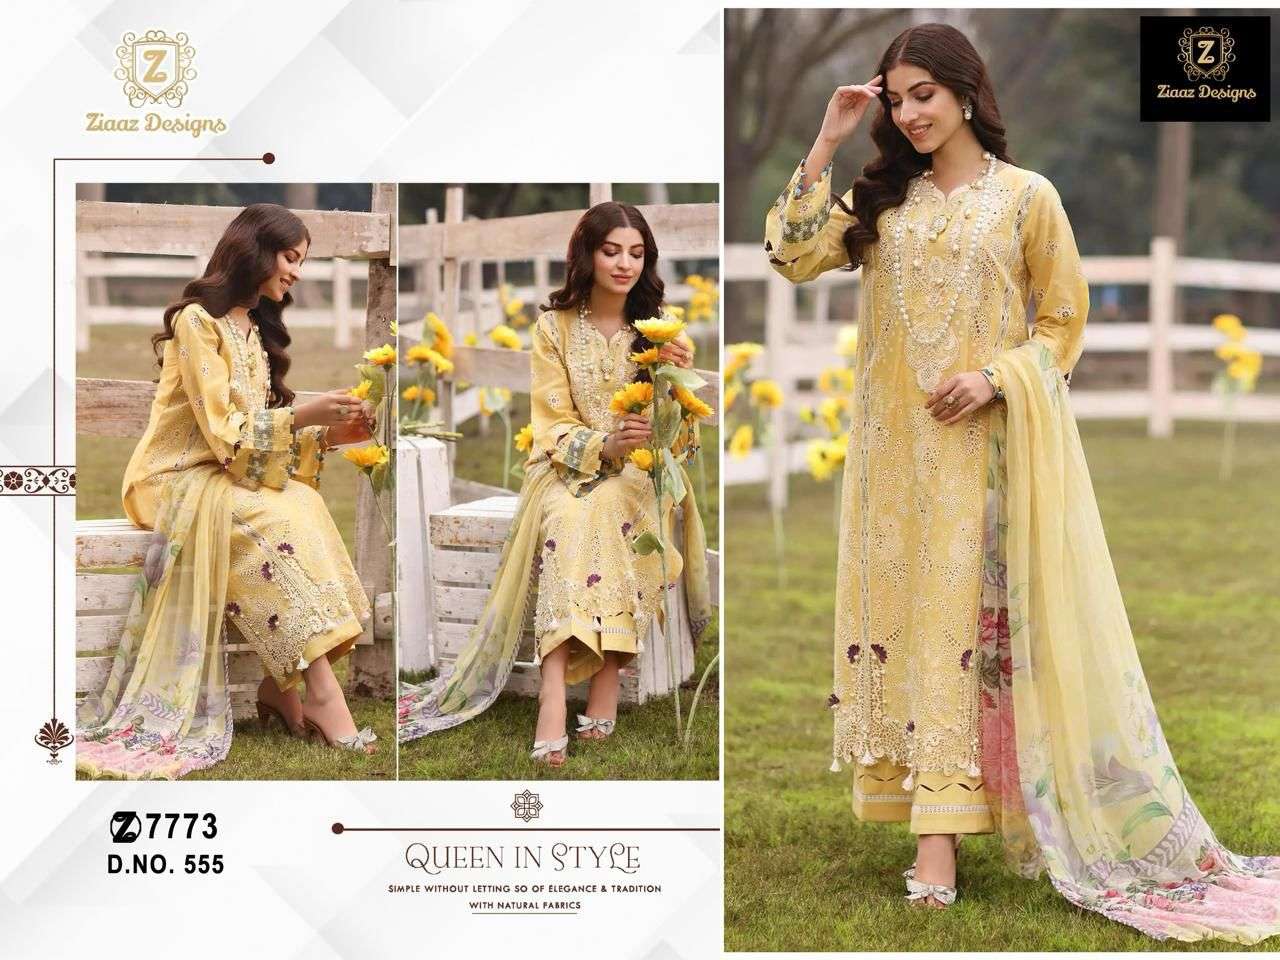 ZIAAZ 555 RAYON COTTON WITH EMBROIDERY WORK YELLOW SHADES PA...